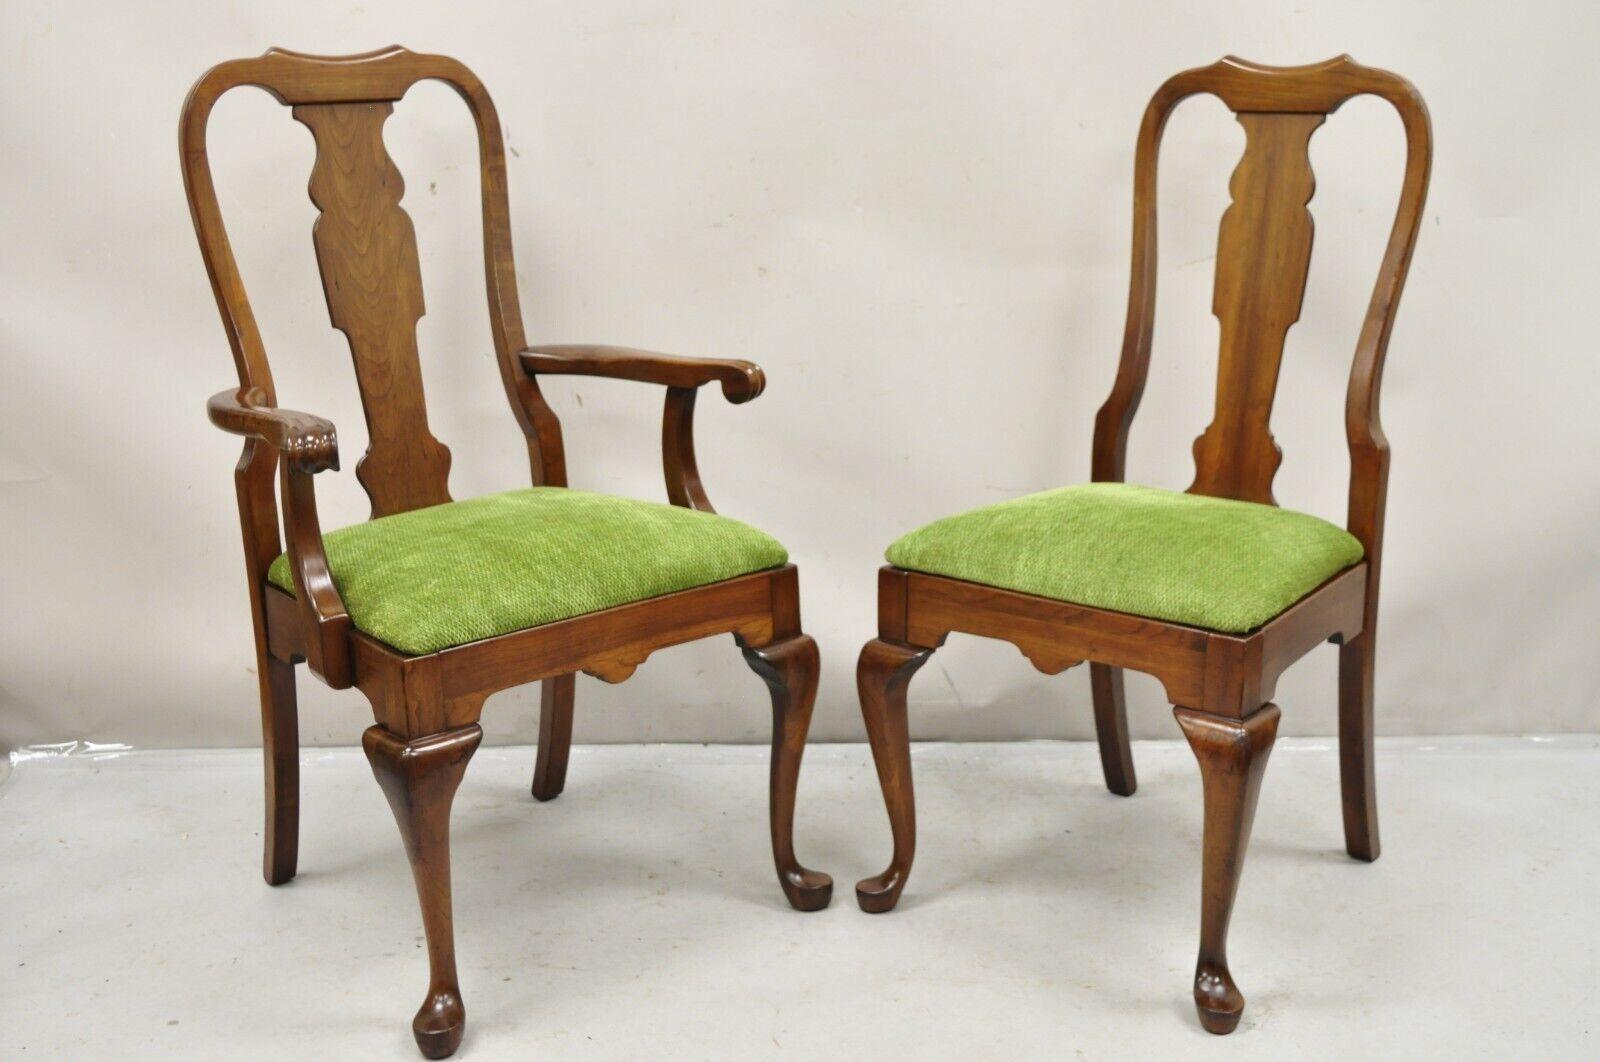 Pennsylvania House Cherry Wood Queen Anne Style T-Back Dining Chairs - Set of 8. Item feartures (2) Armchairs (6) side chairs, solid cherry wood frames, Queen Anne legs, original stamp, quality American  craftsmanship. Mid to Late 20th